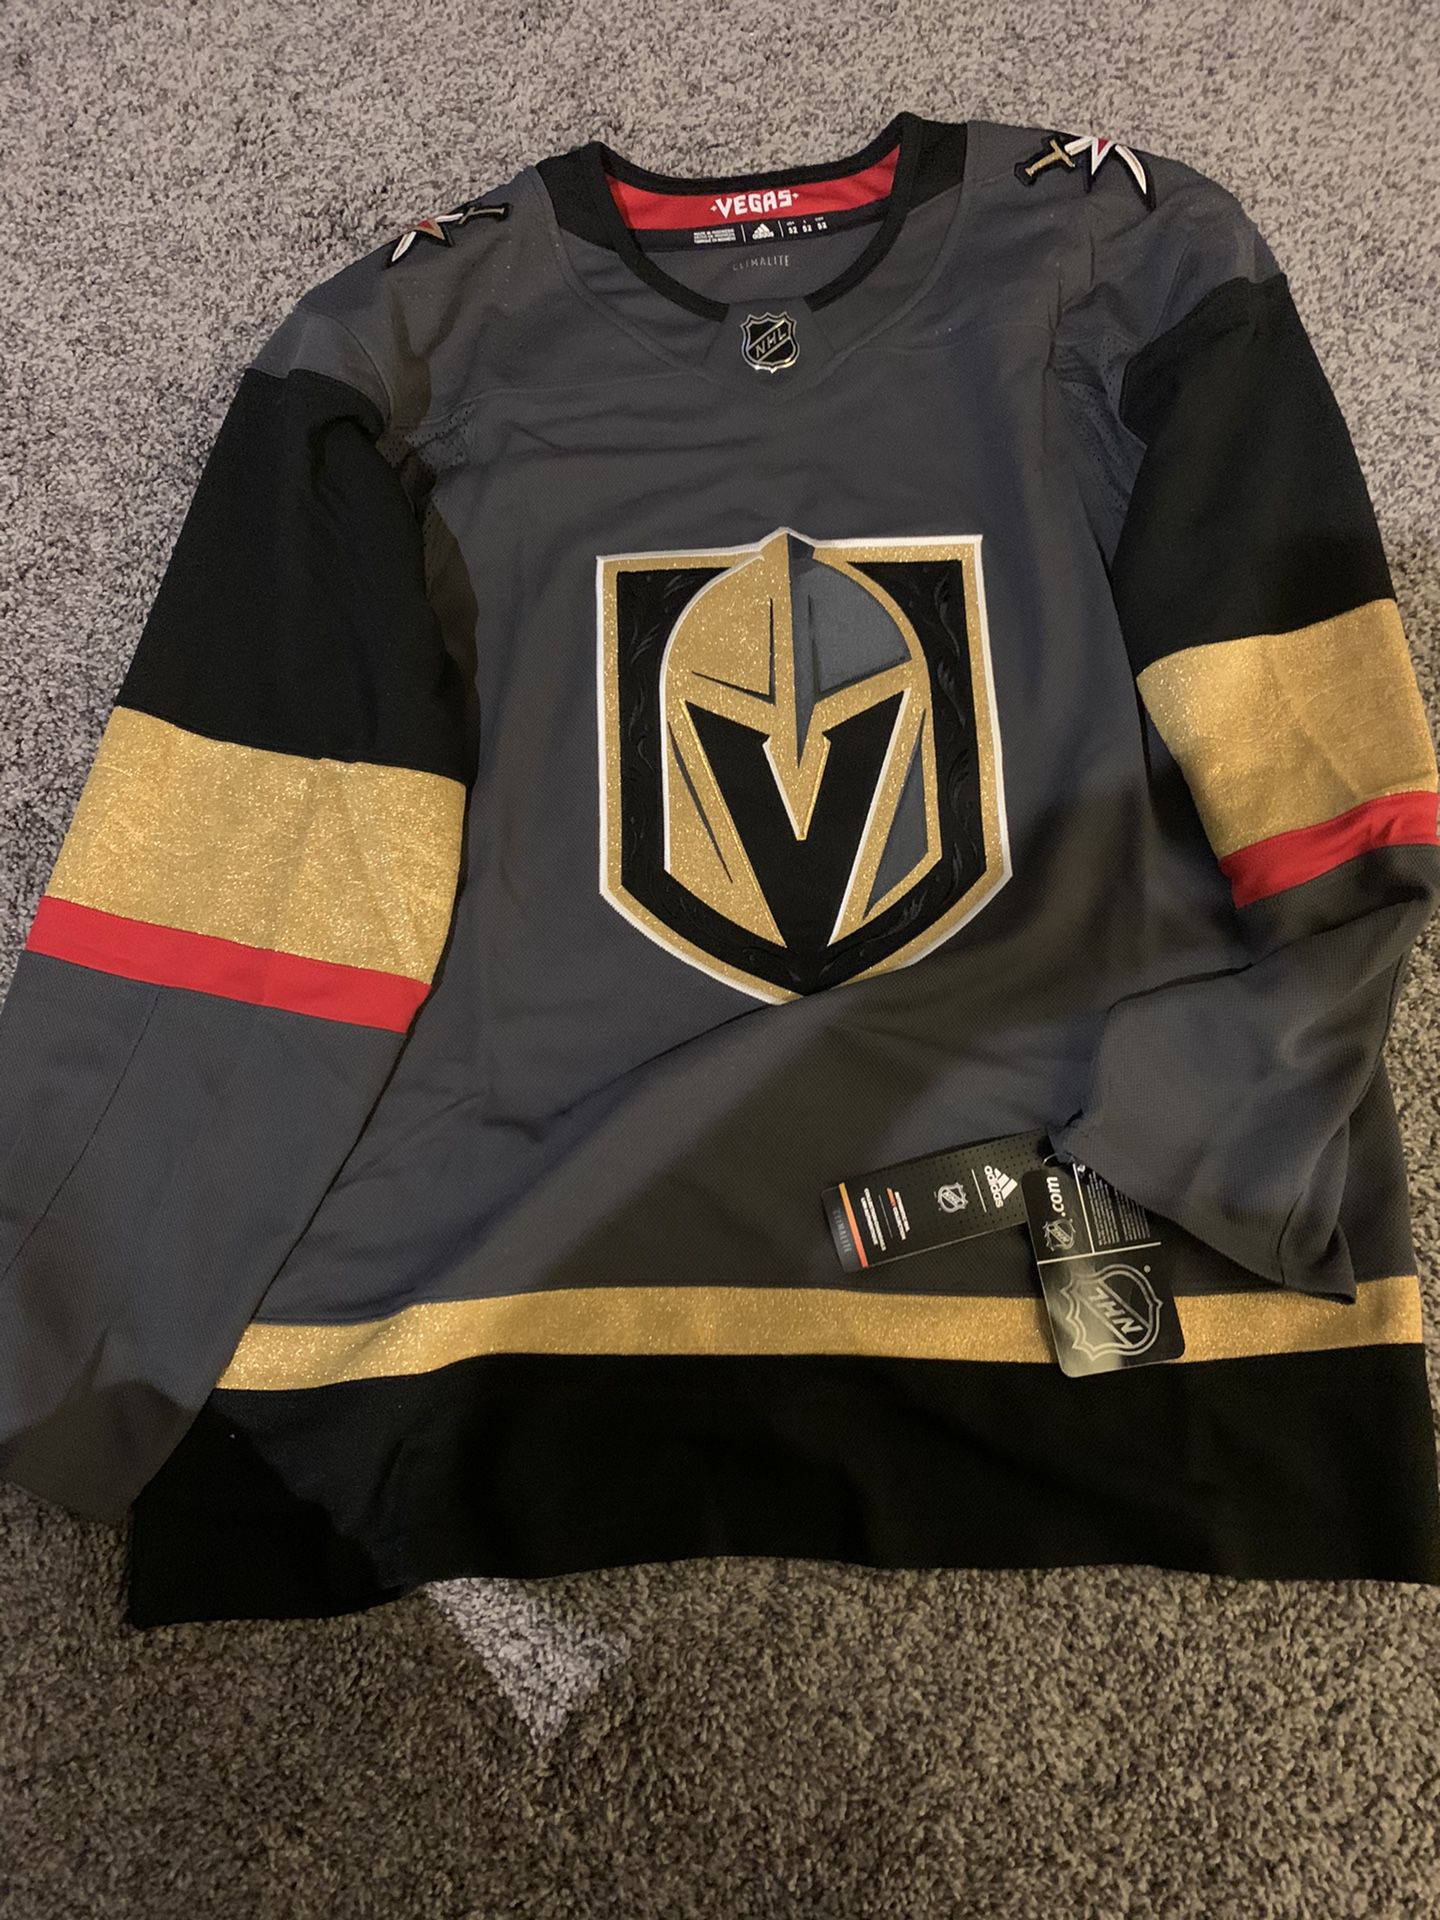 Vegas Golden knights jersey Authentic